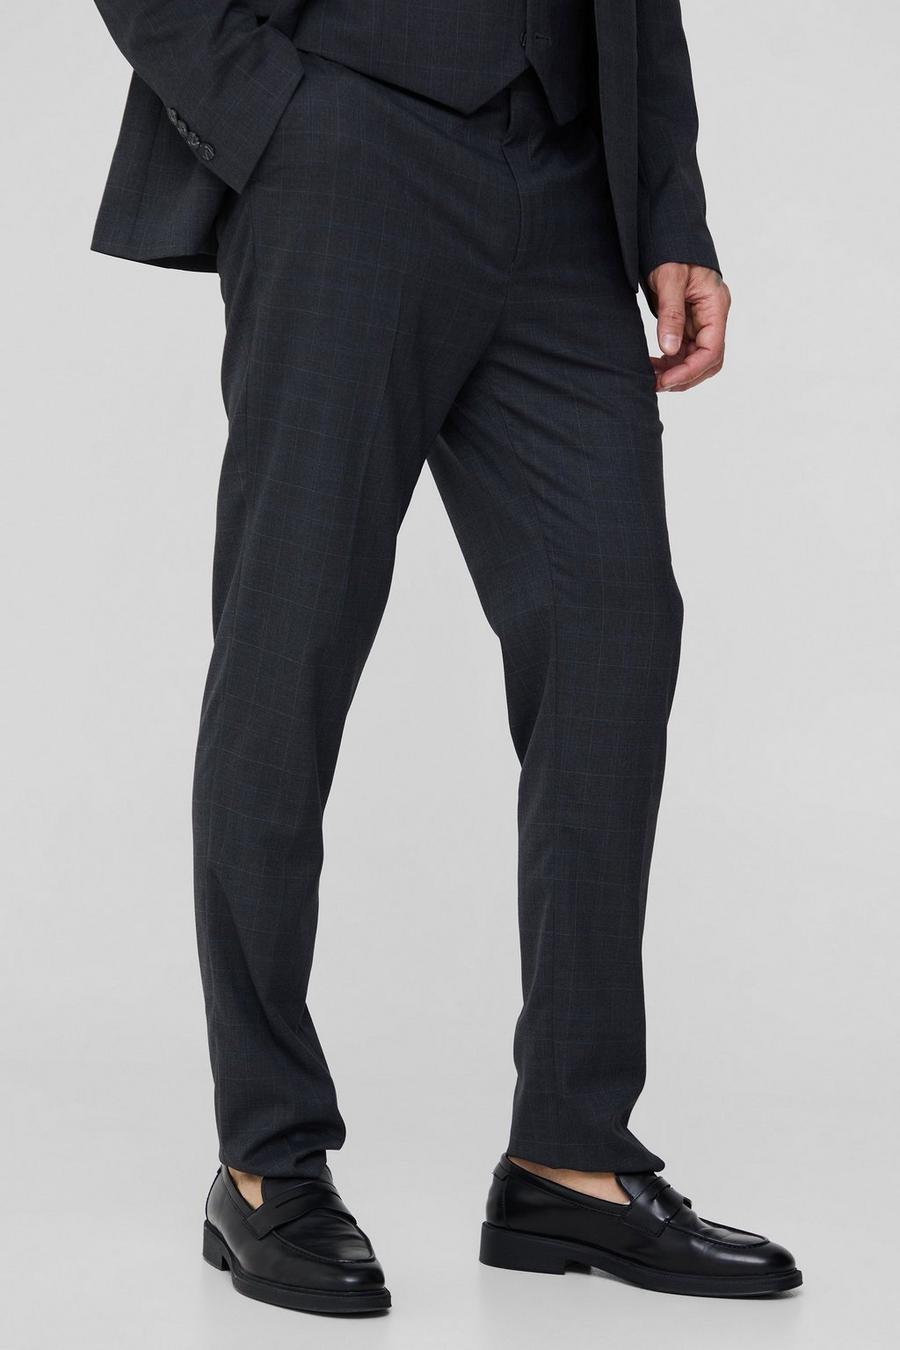 Tall Charcoal Check Slim Fit Suit Trouser